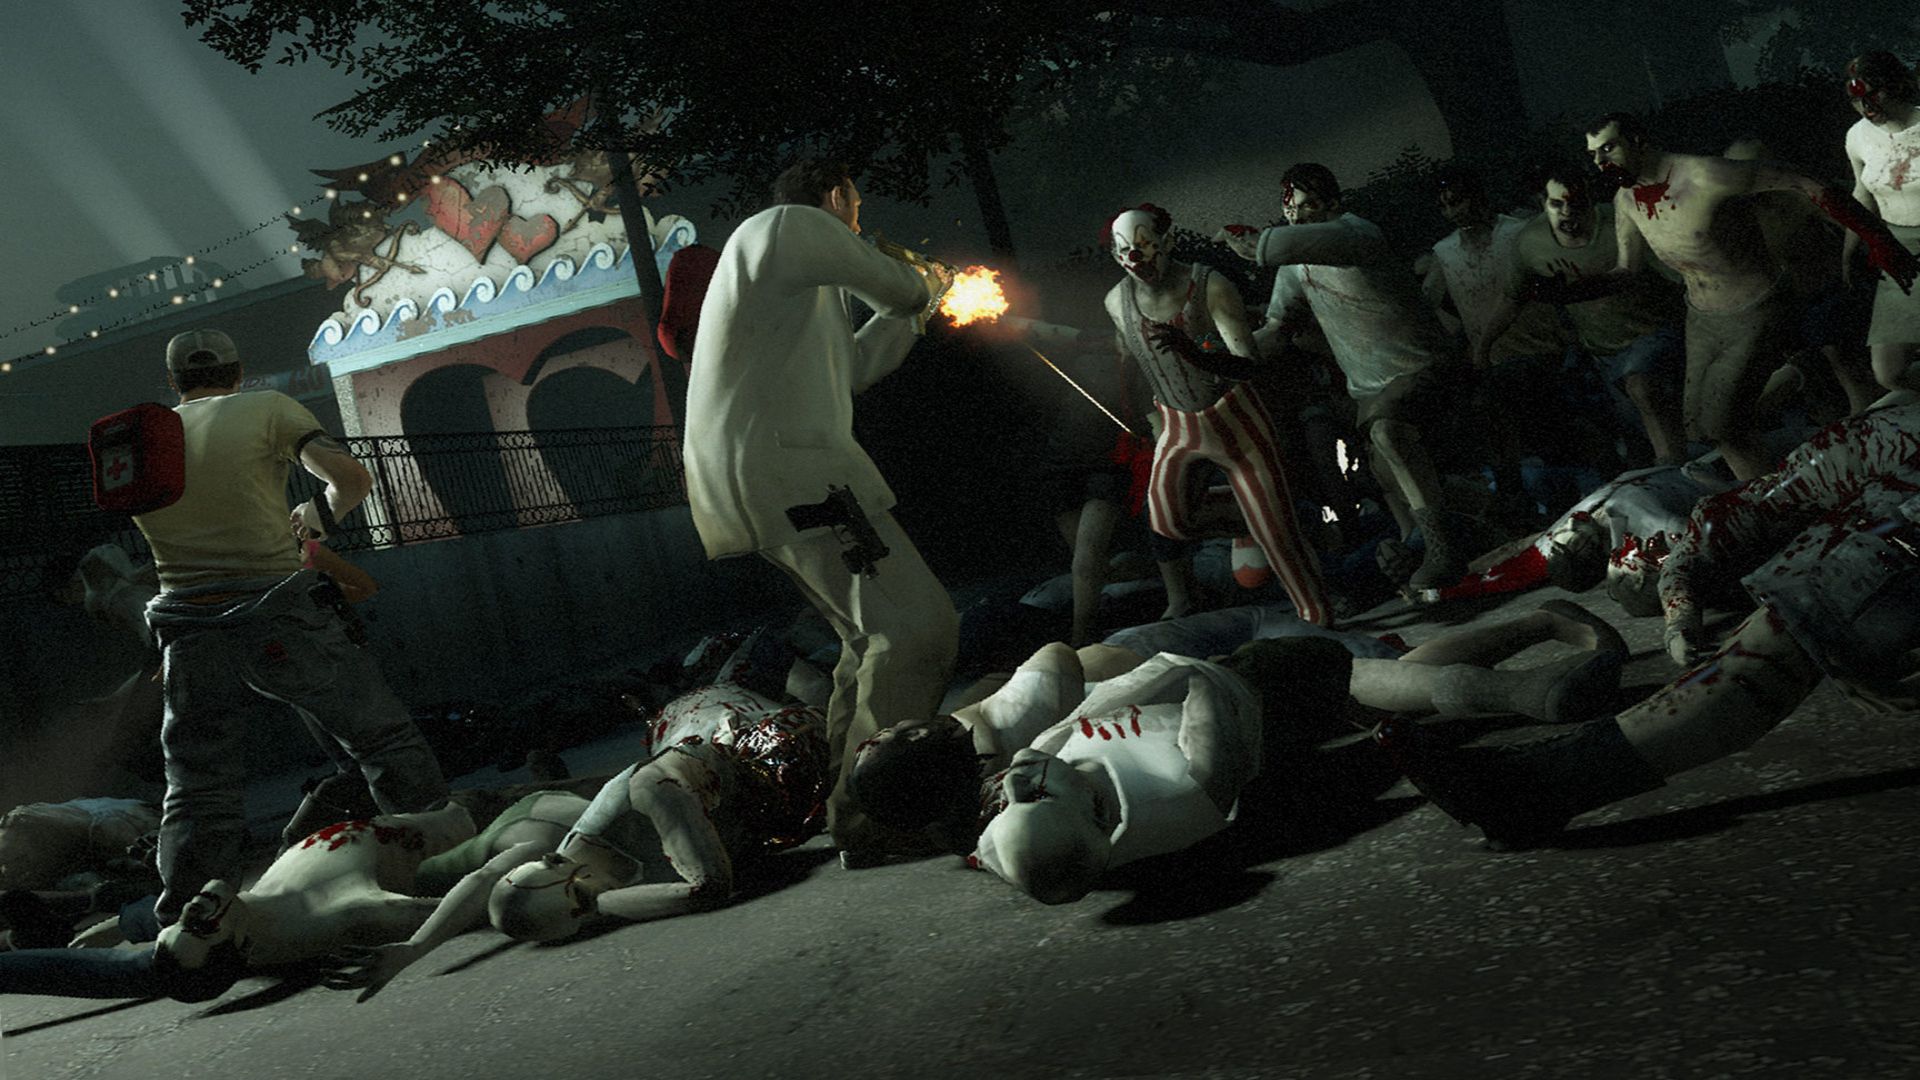 L4D2 Horde of zombies charging